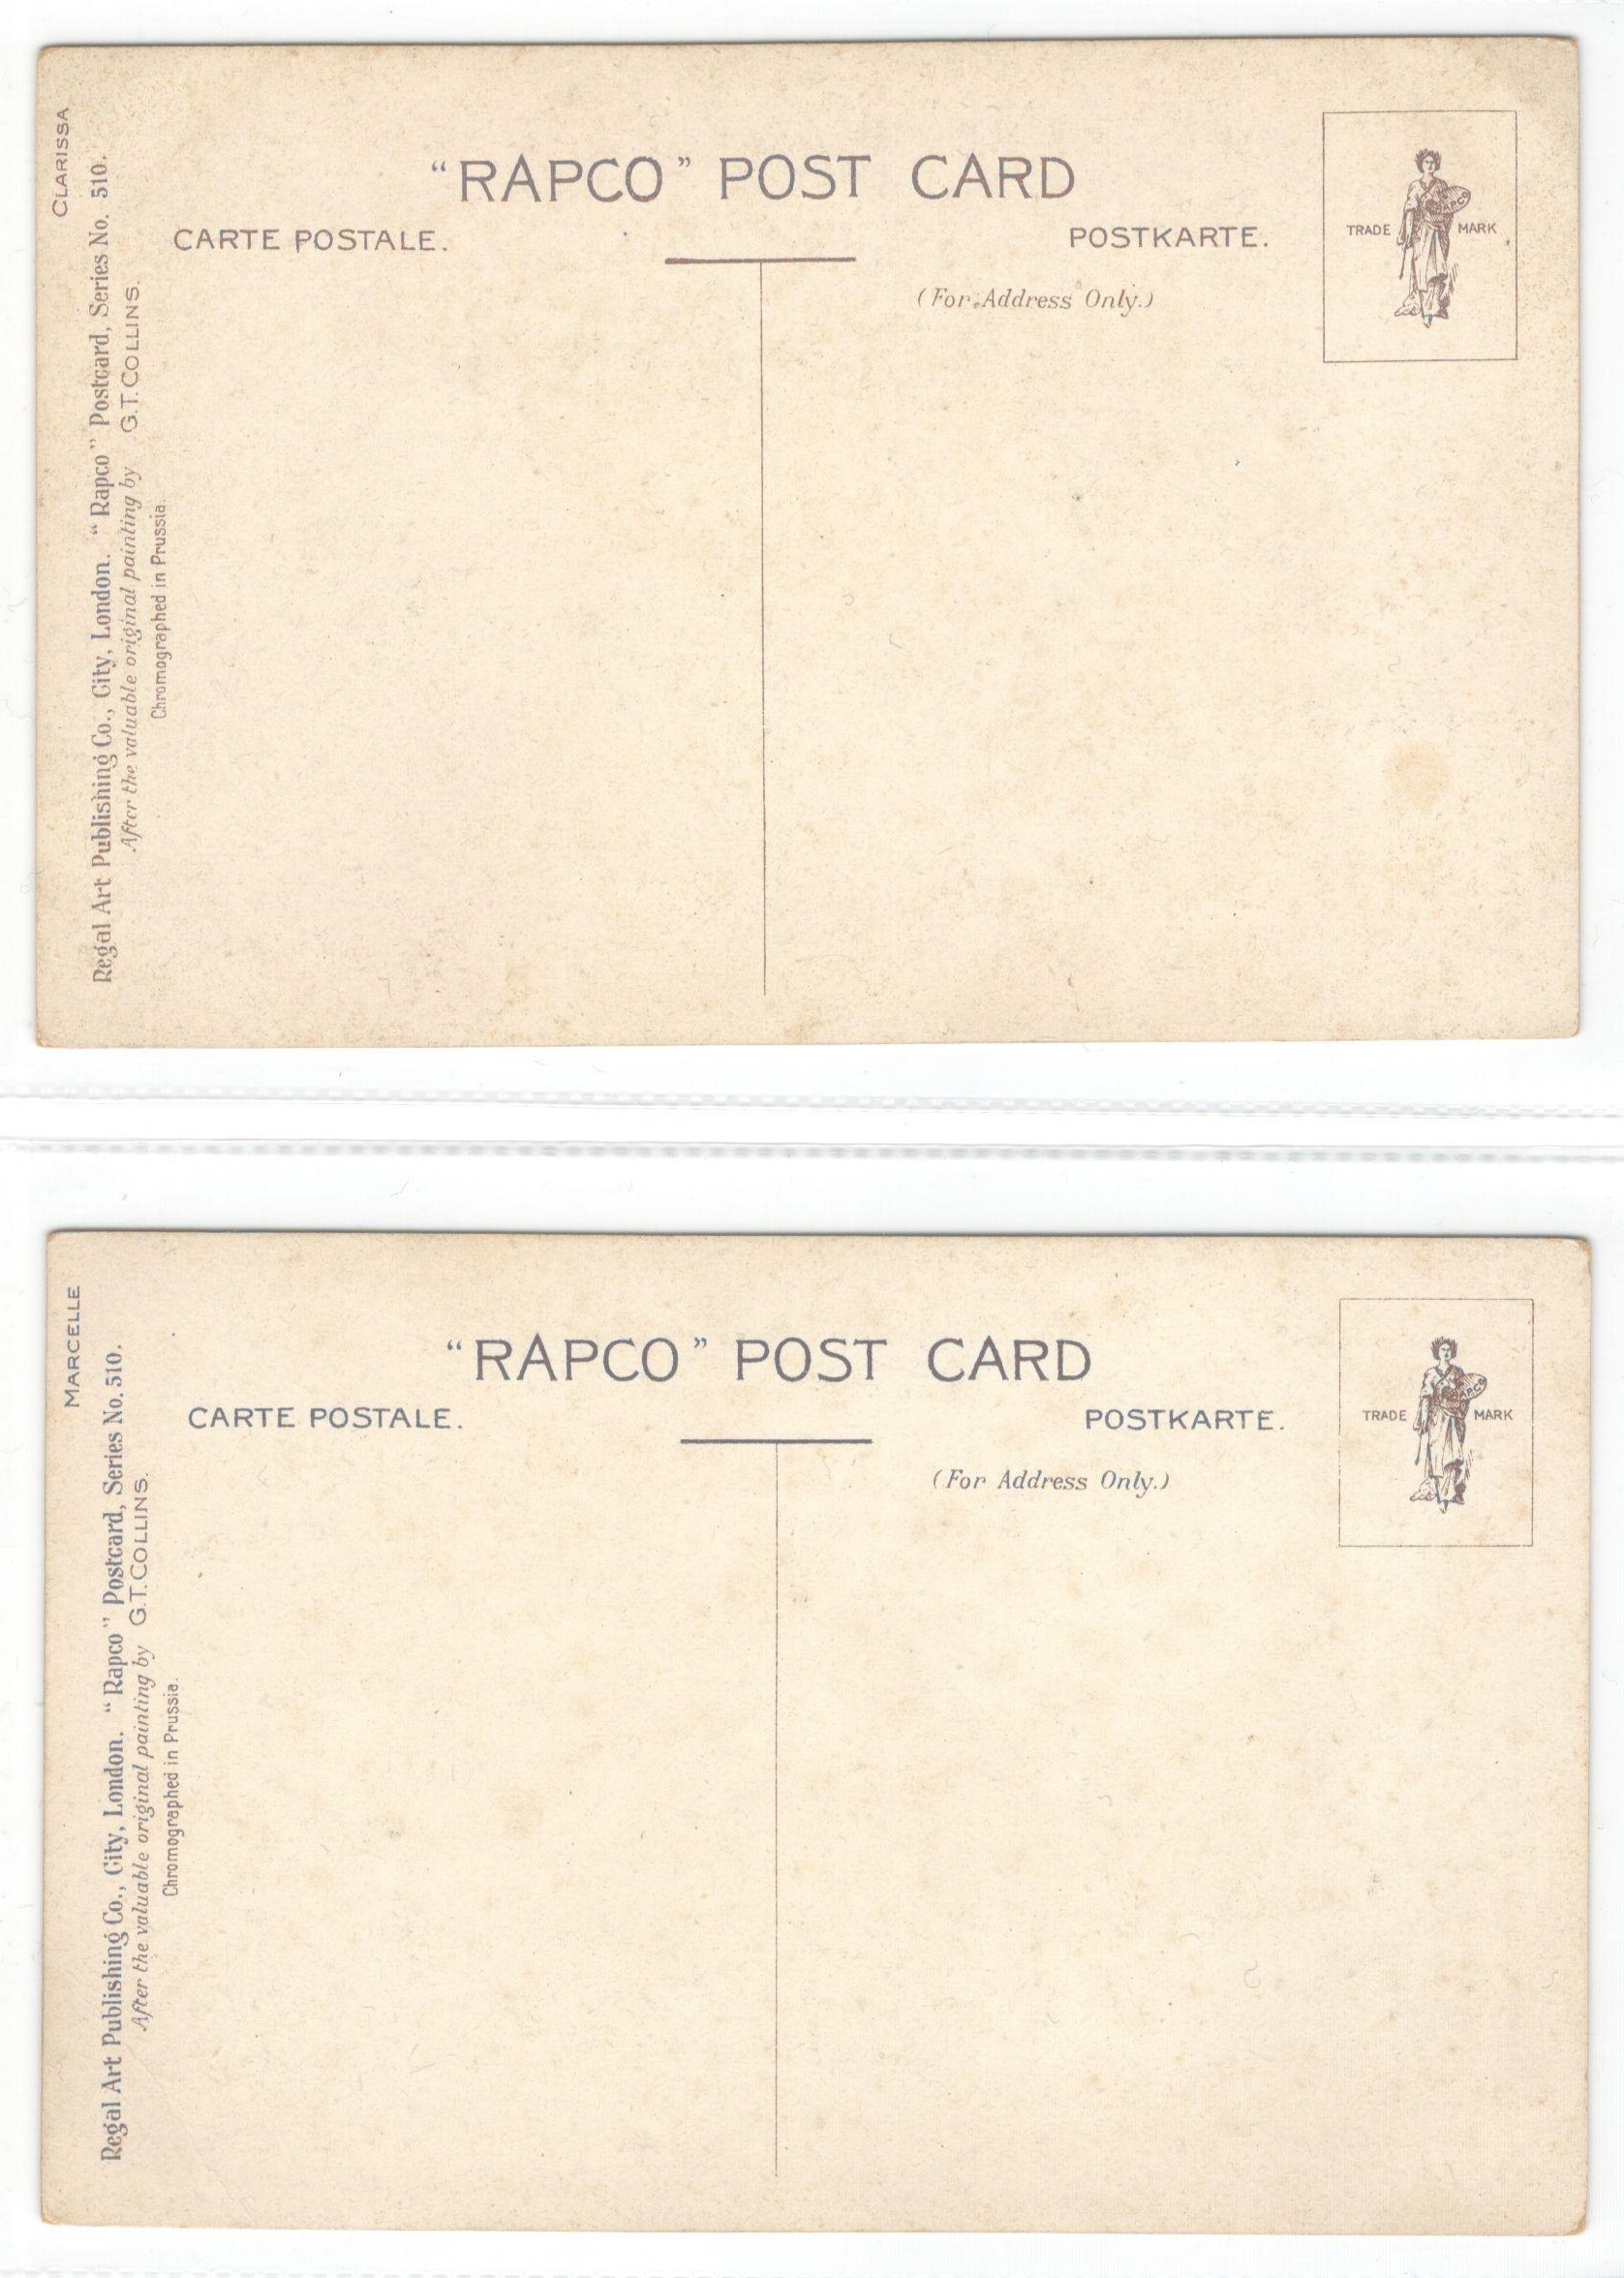 FOUR ARTIST SIGNED POSTCARDS - G T COLLINS BY REGAL ART PUBLISHING Co. LONDON - RAPCO SERIES 510 - Image 4 of 4